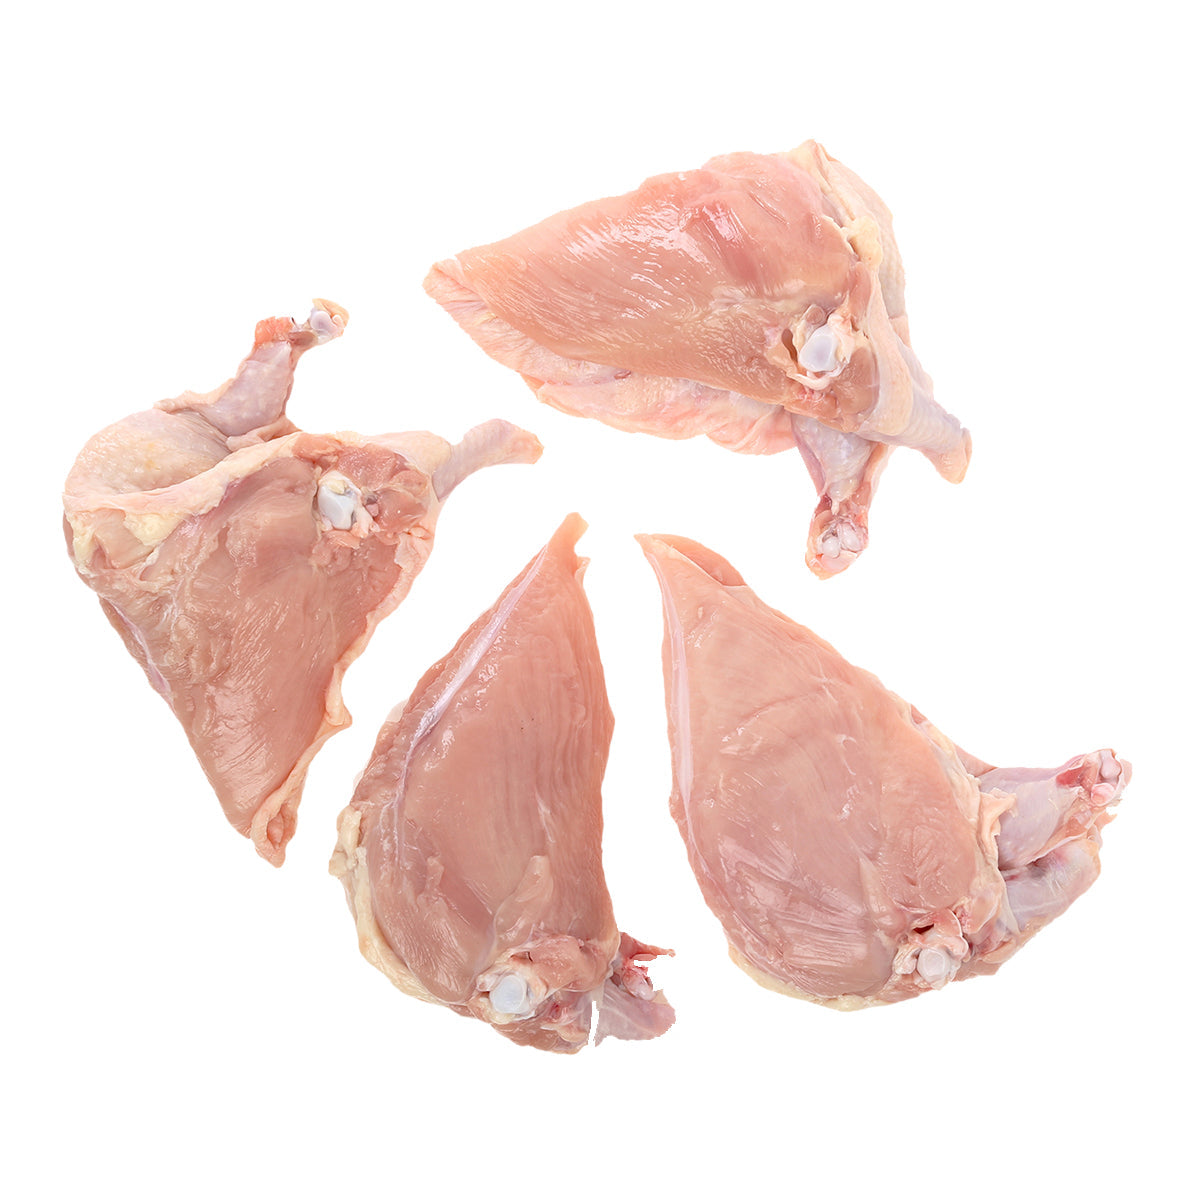 Mennella'S Poultry Co. ABF French Airline Breasts 8 oz